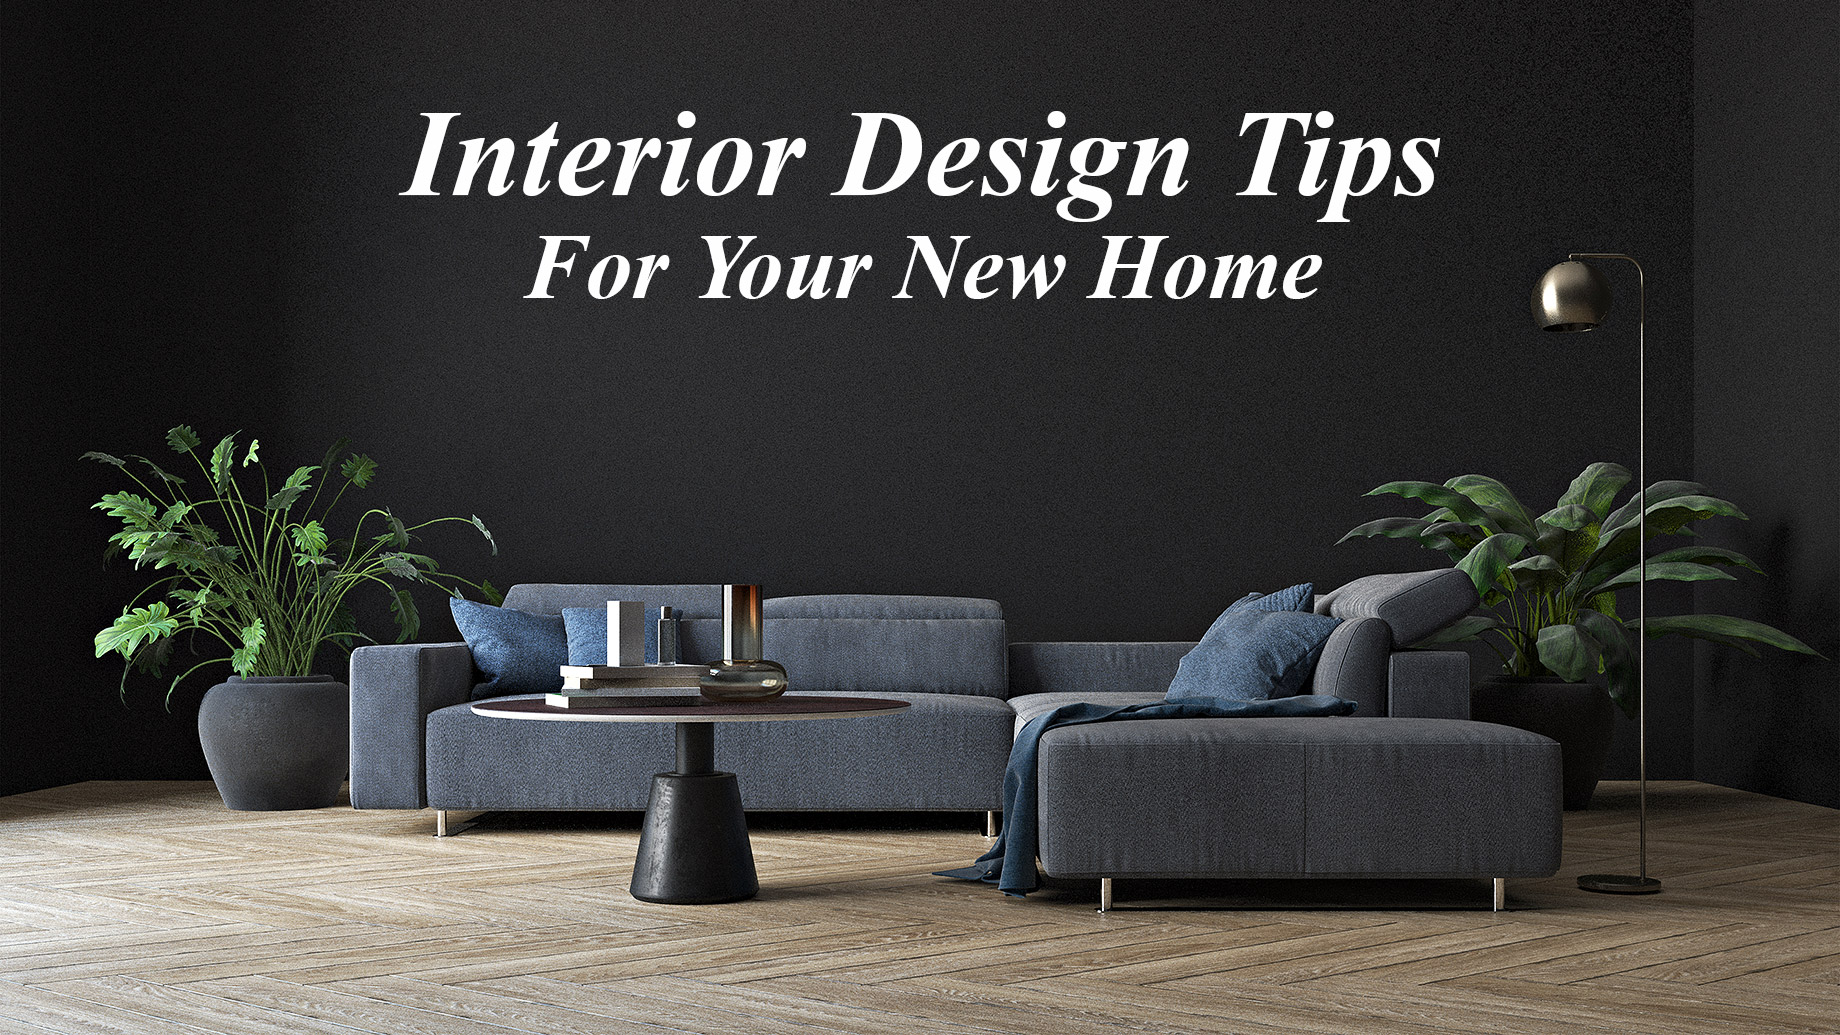 Interior Design Tips For Your New Home